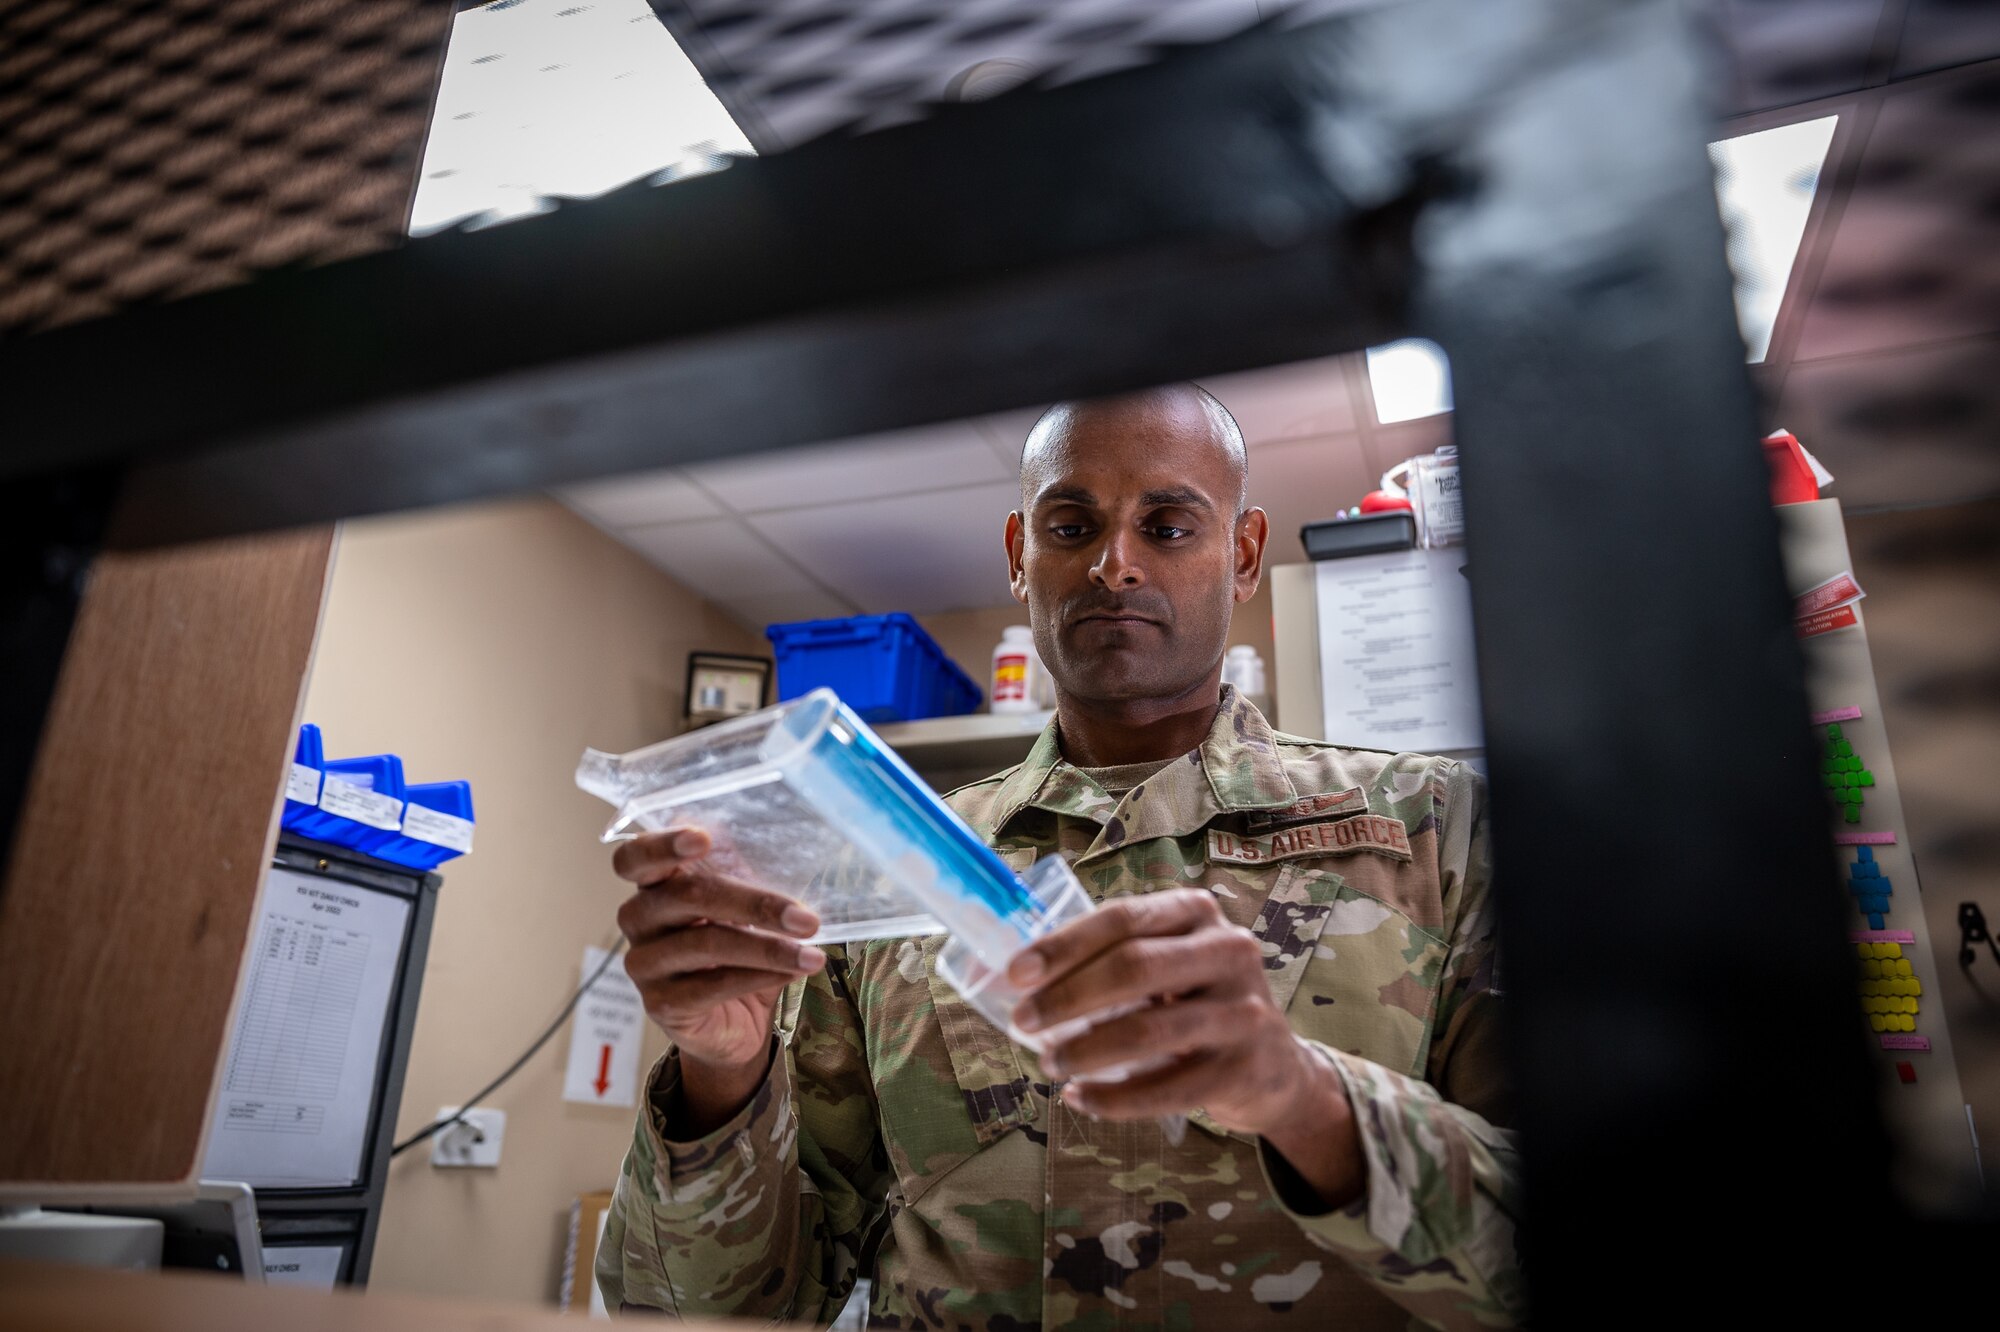 U.S. Air Force Maj. Sunil Francis, 332d Expeditionary Medical Group chief nurse, fills a prescription at an undisclosed location in Southwest Asia, April 6, 2022. Francis is a multi-capable Airman because he supports the pharmacist, Capt. Asia Sanders, 332d EMDG chief of ancillary services, as the on-call pharmacist. (U.S. Air Force photo by Master Sgt. Christopher Parr)